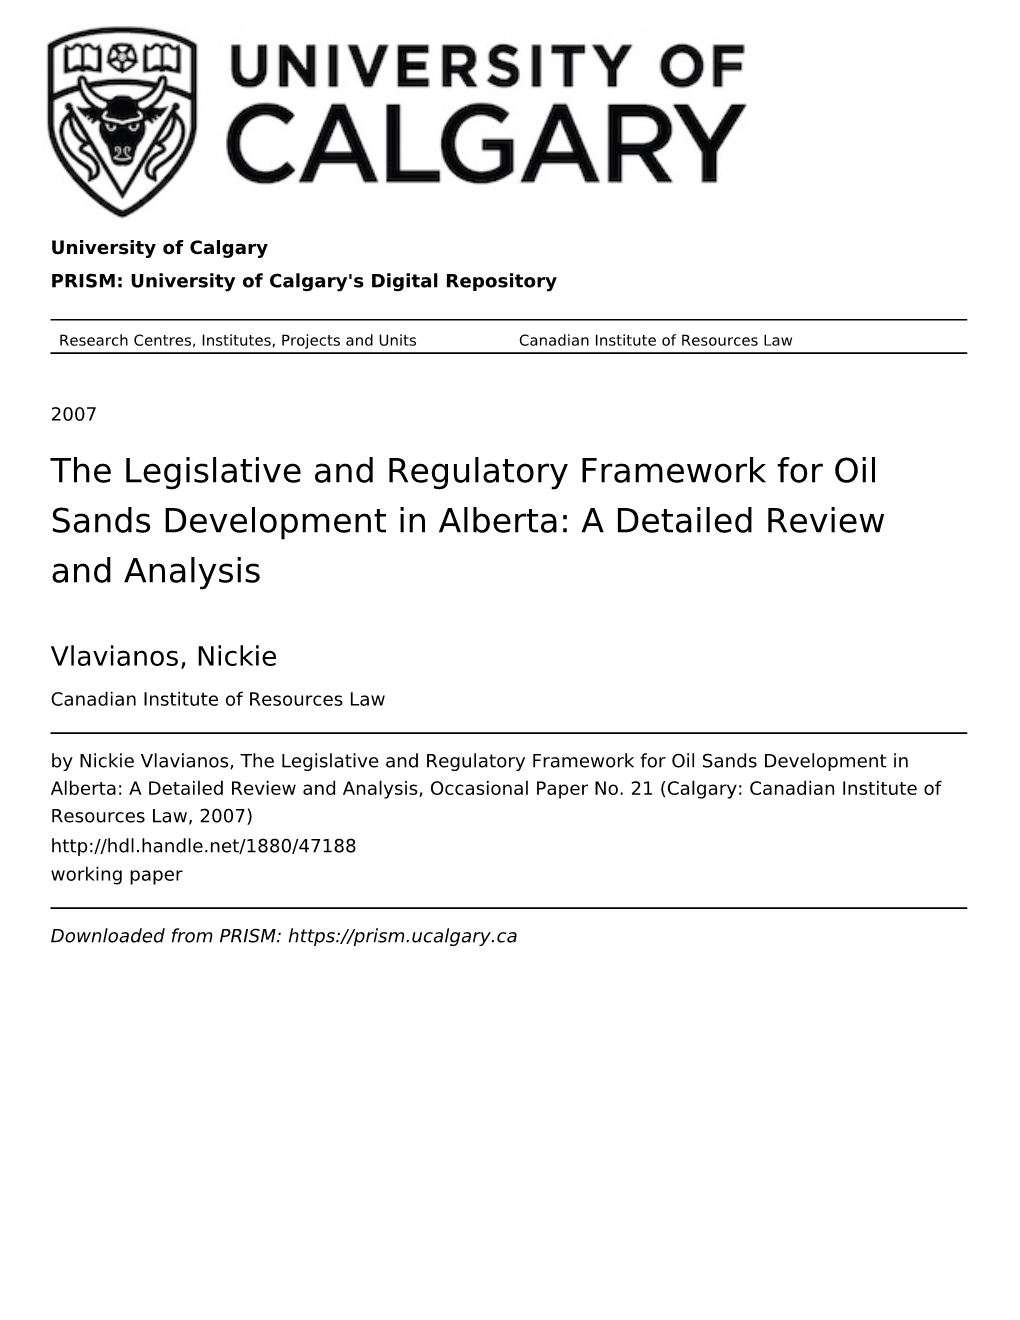 The Legislative and Regulatory Framework for Oil Sands Development in Alberta: a Detailed Review and Analysis